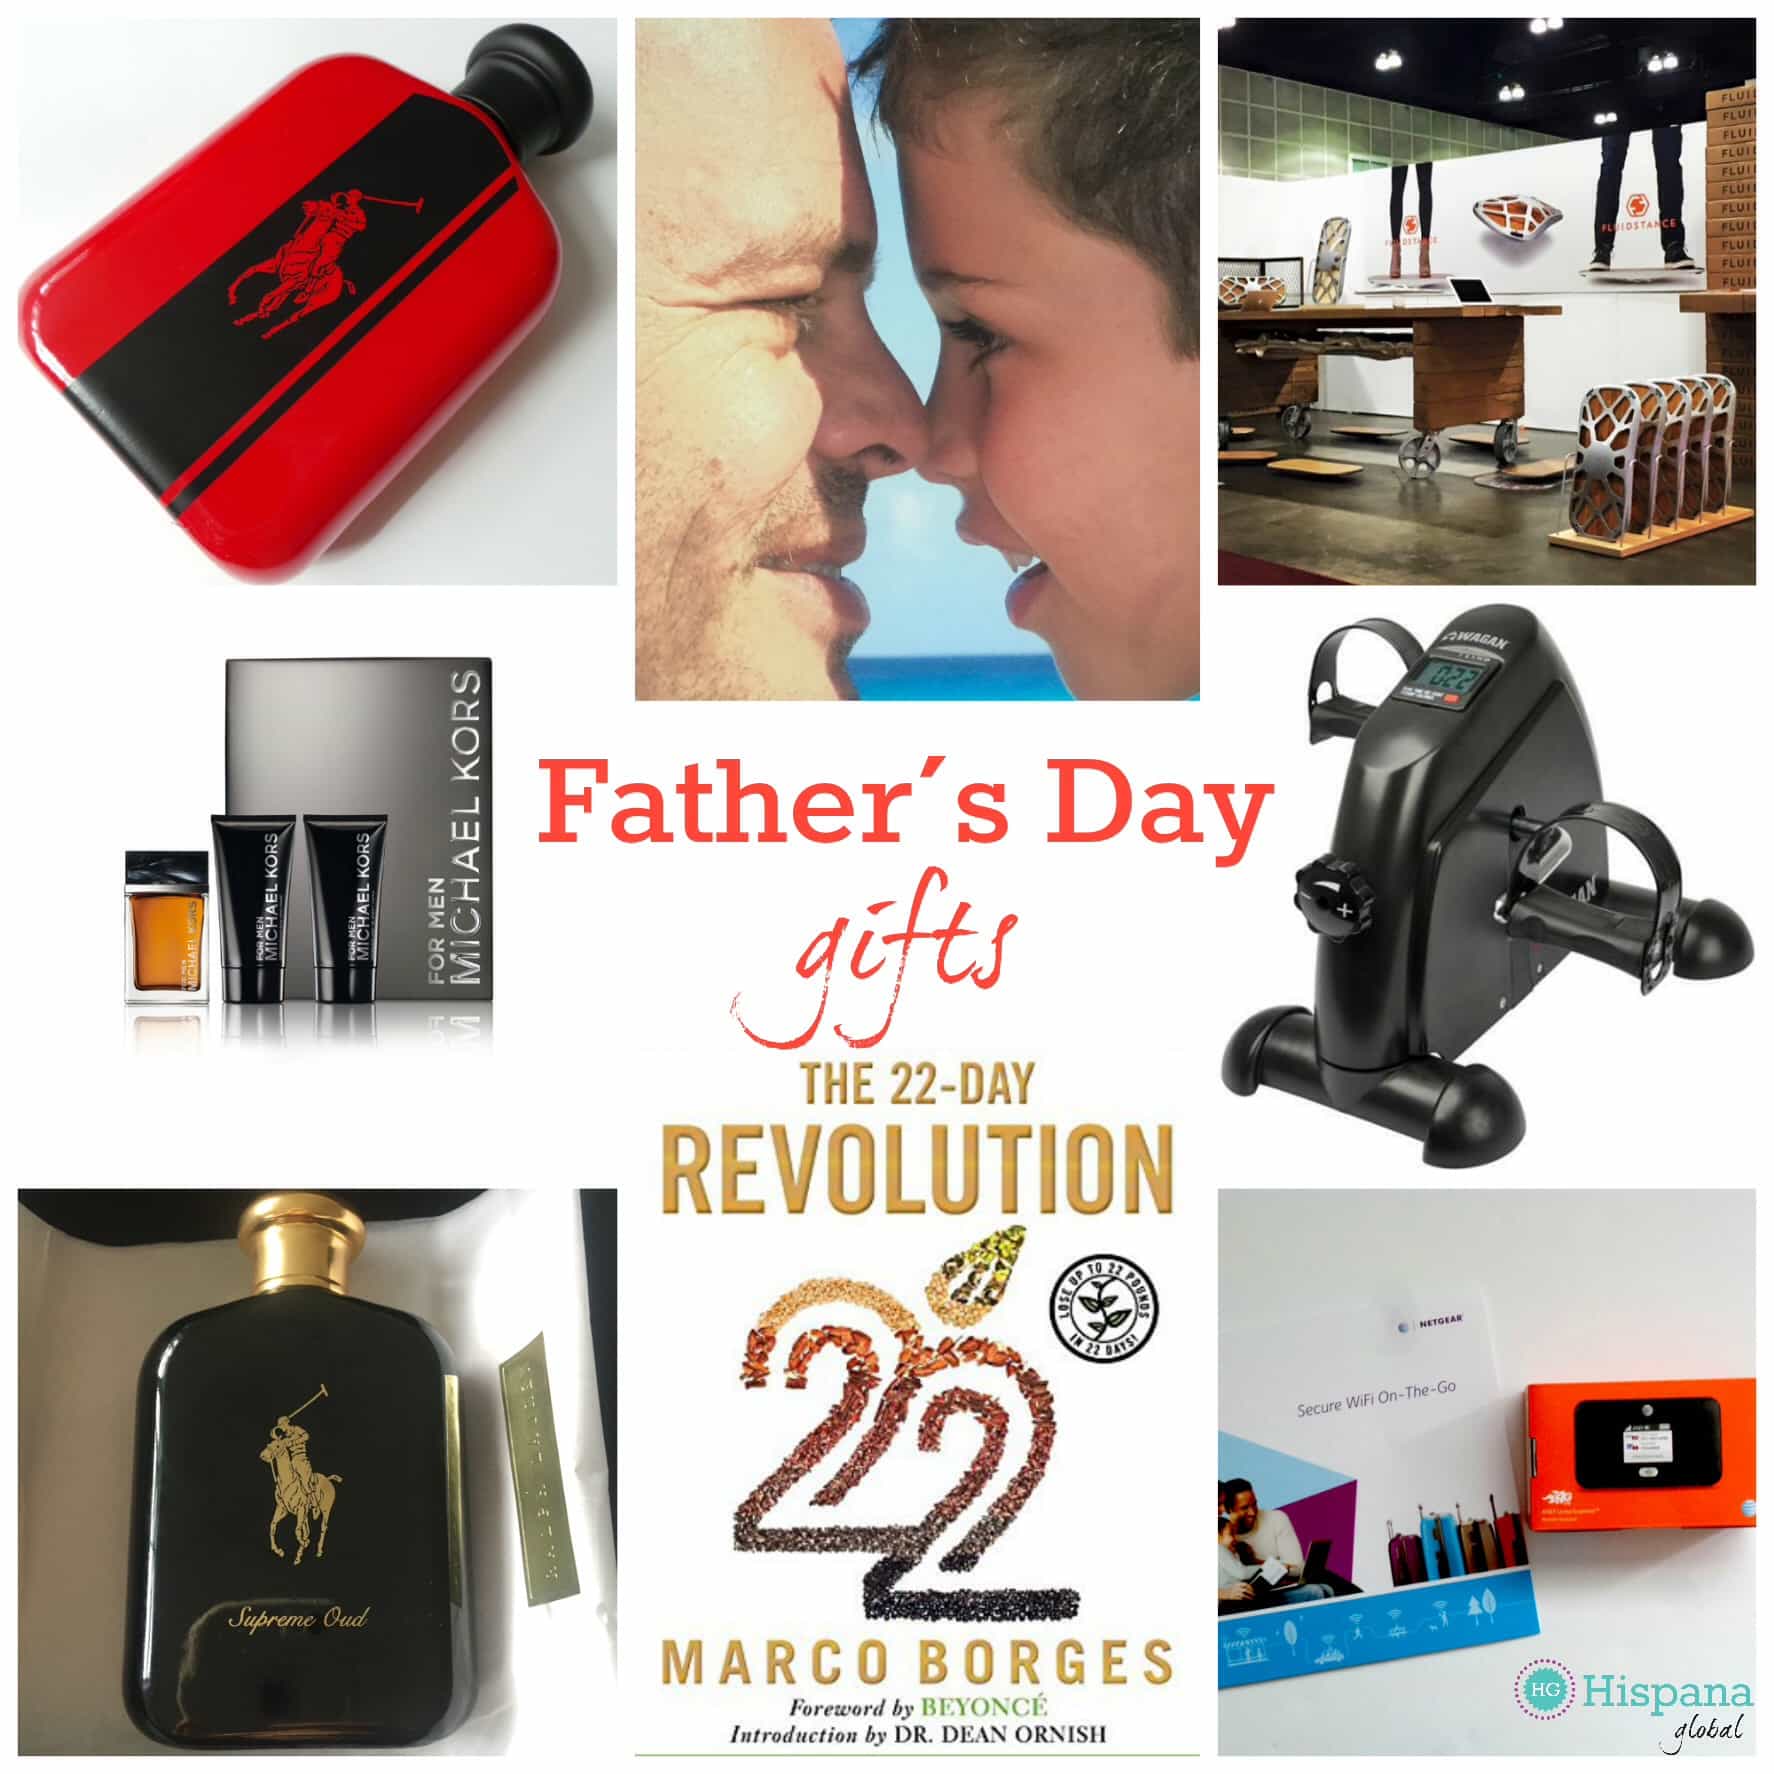 5 fabulous Father’s Day gift ideas